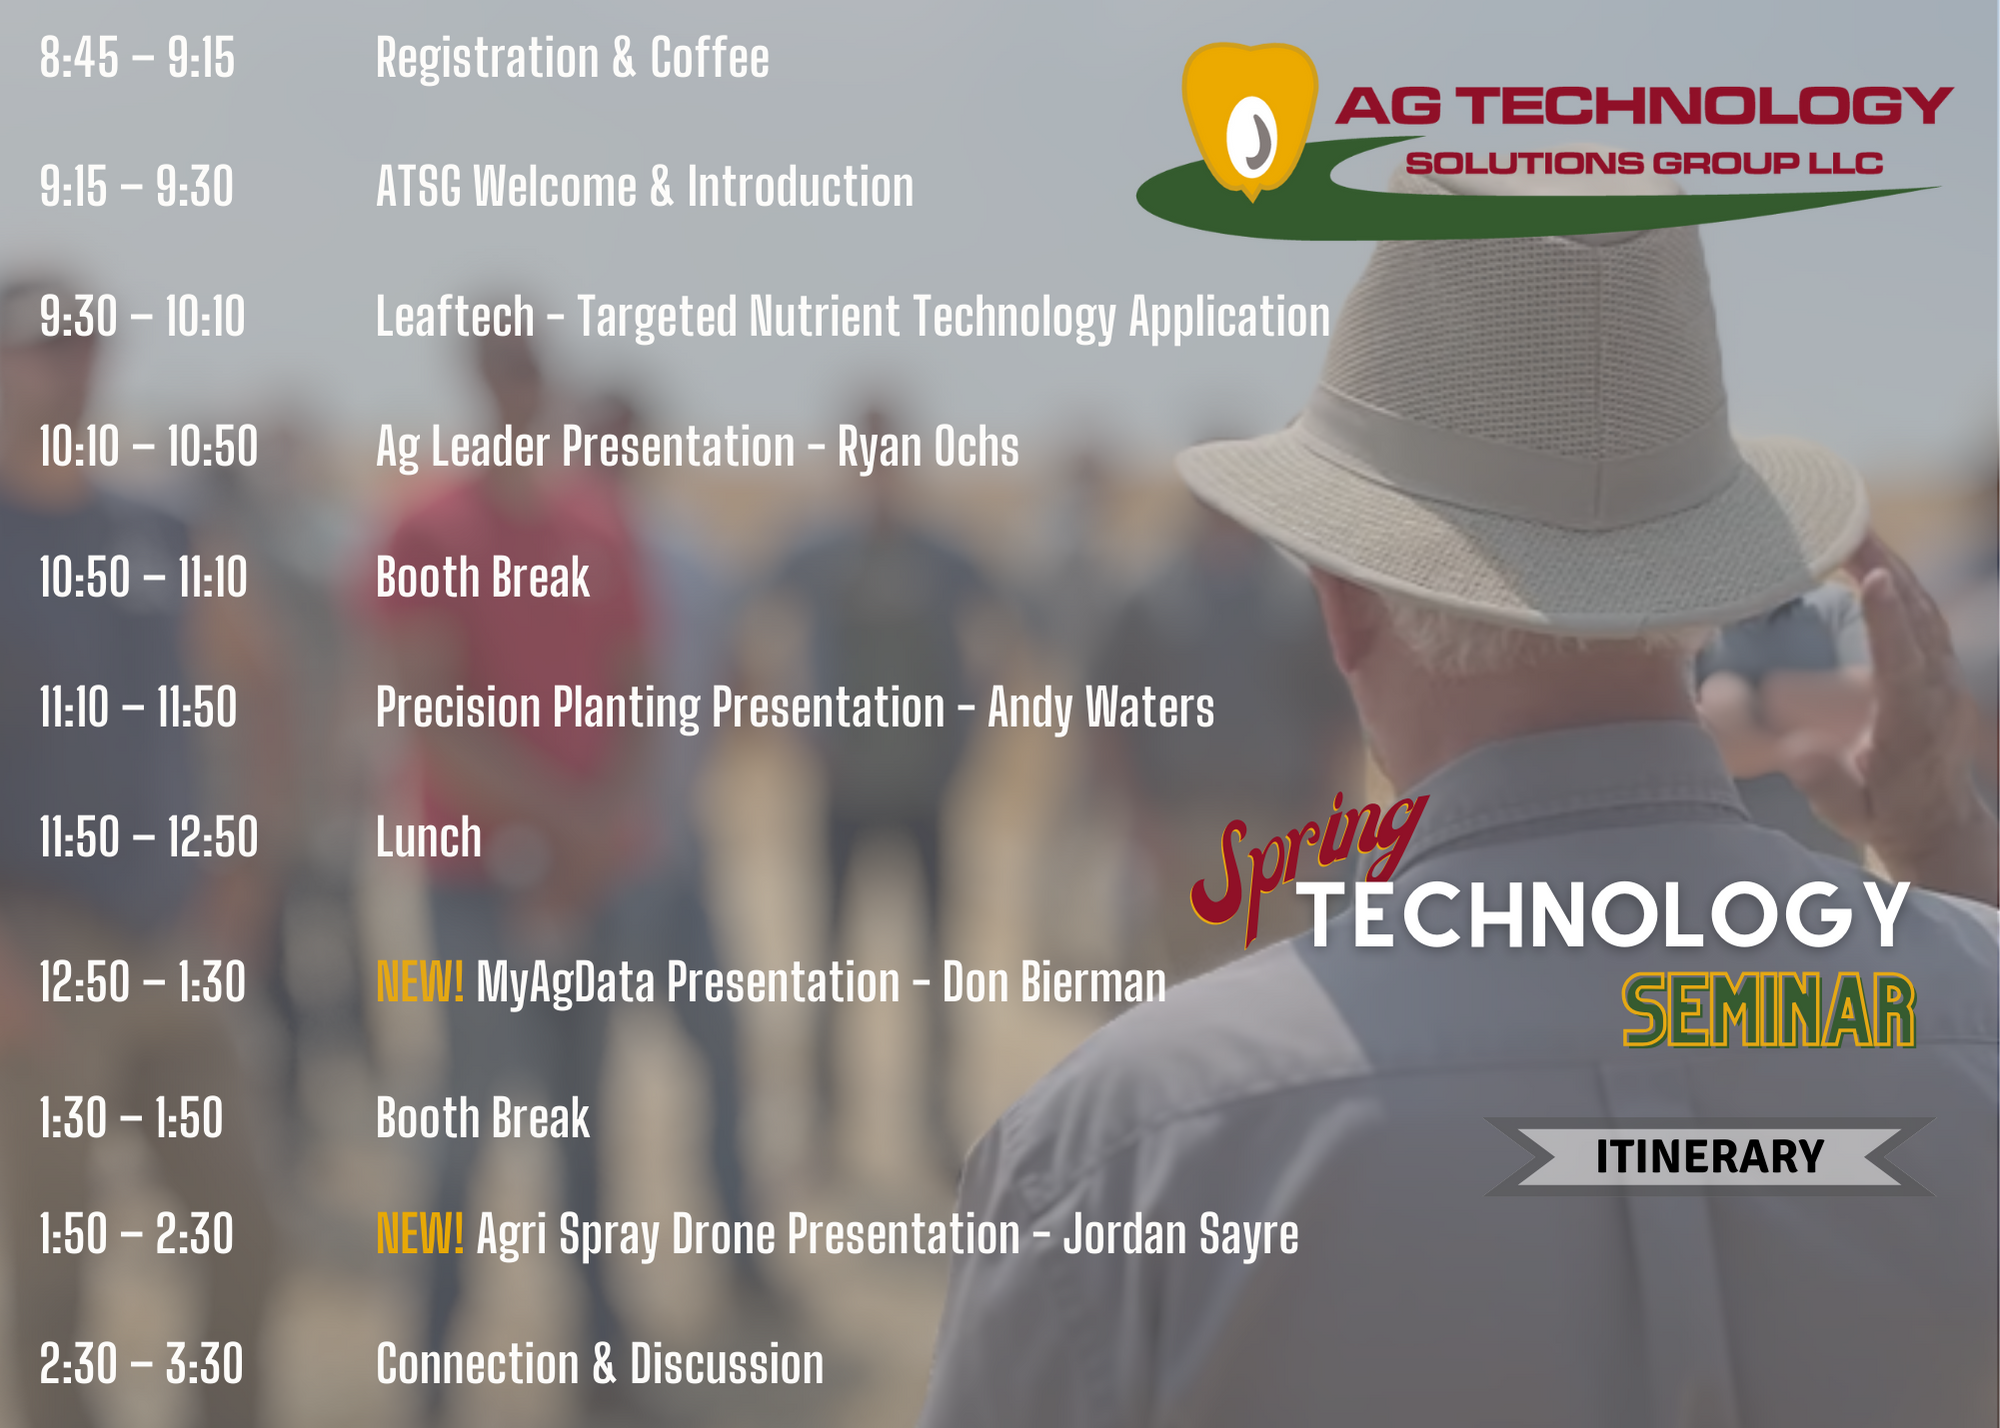 Ag Technology Solutions Group_Itinerary.png